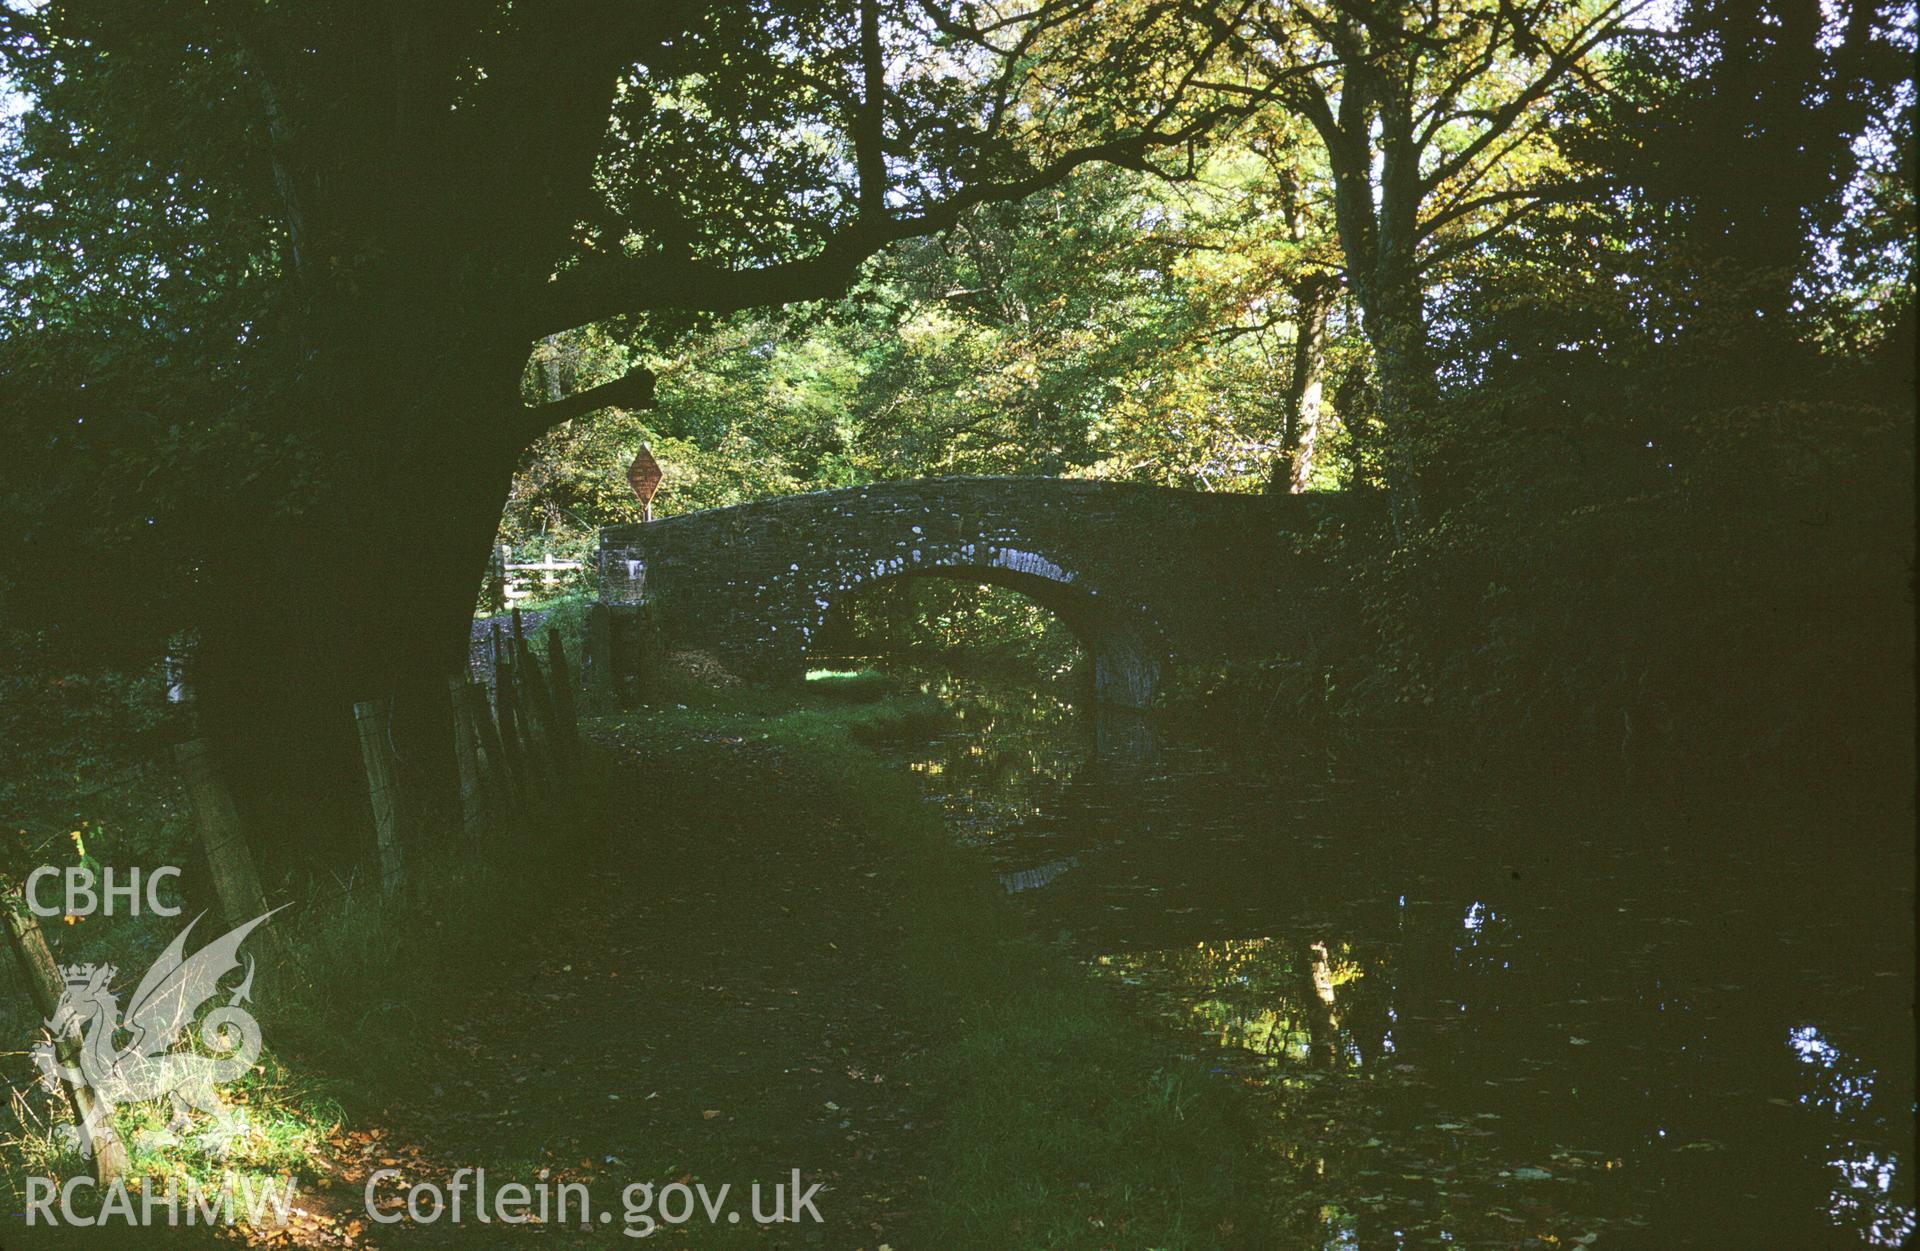 35mm colour slide showing an unidentified bridge over the Brecon and Abergavenny Canal, Breconshire by Dylan Roberts.